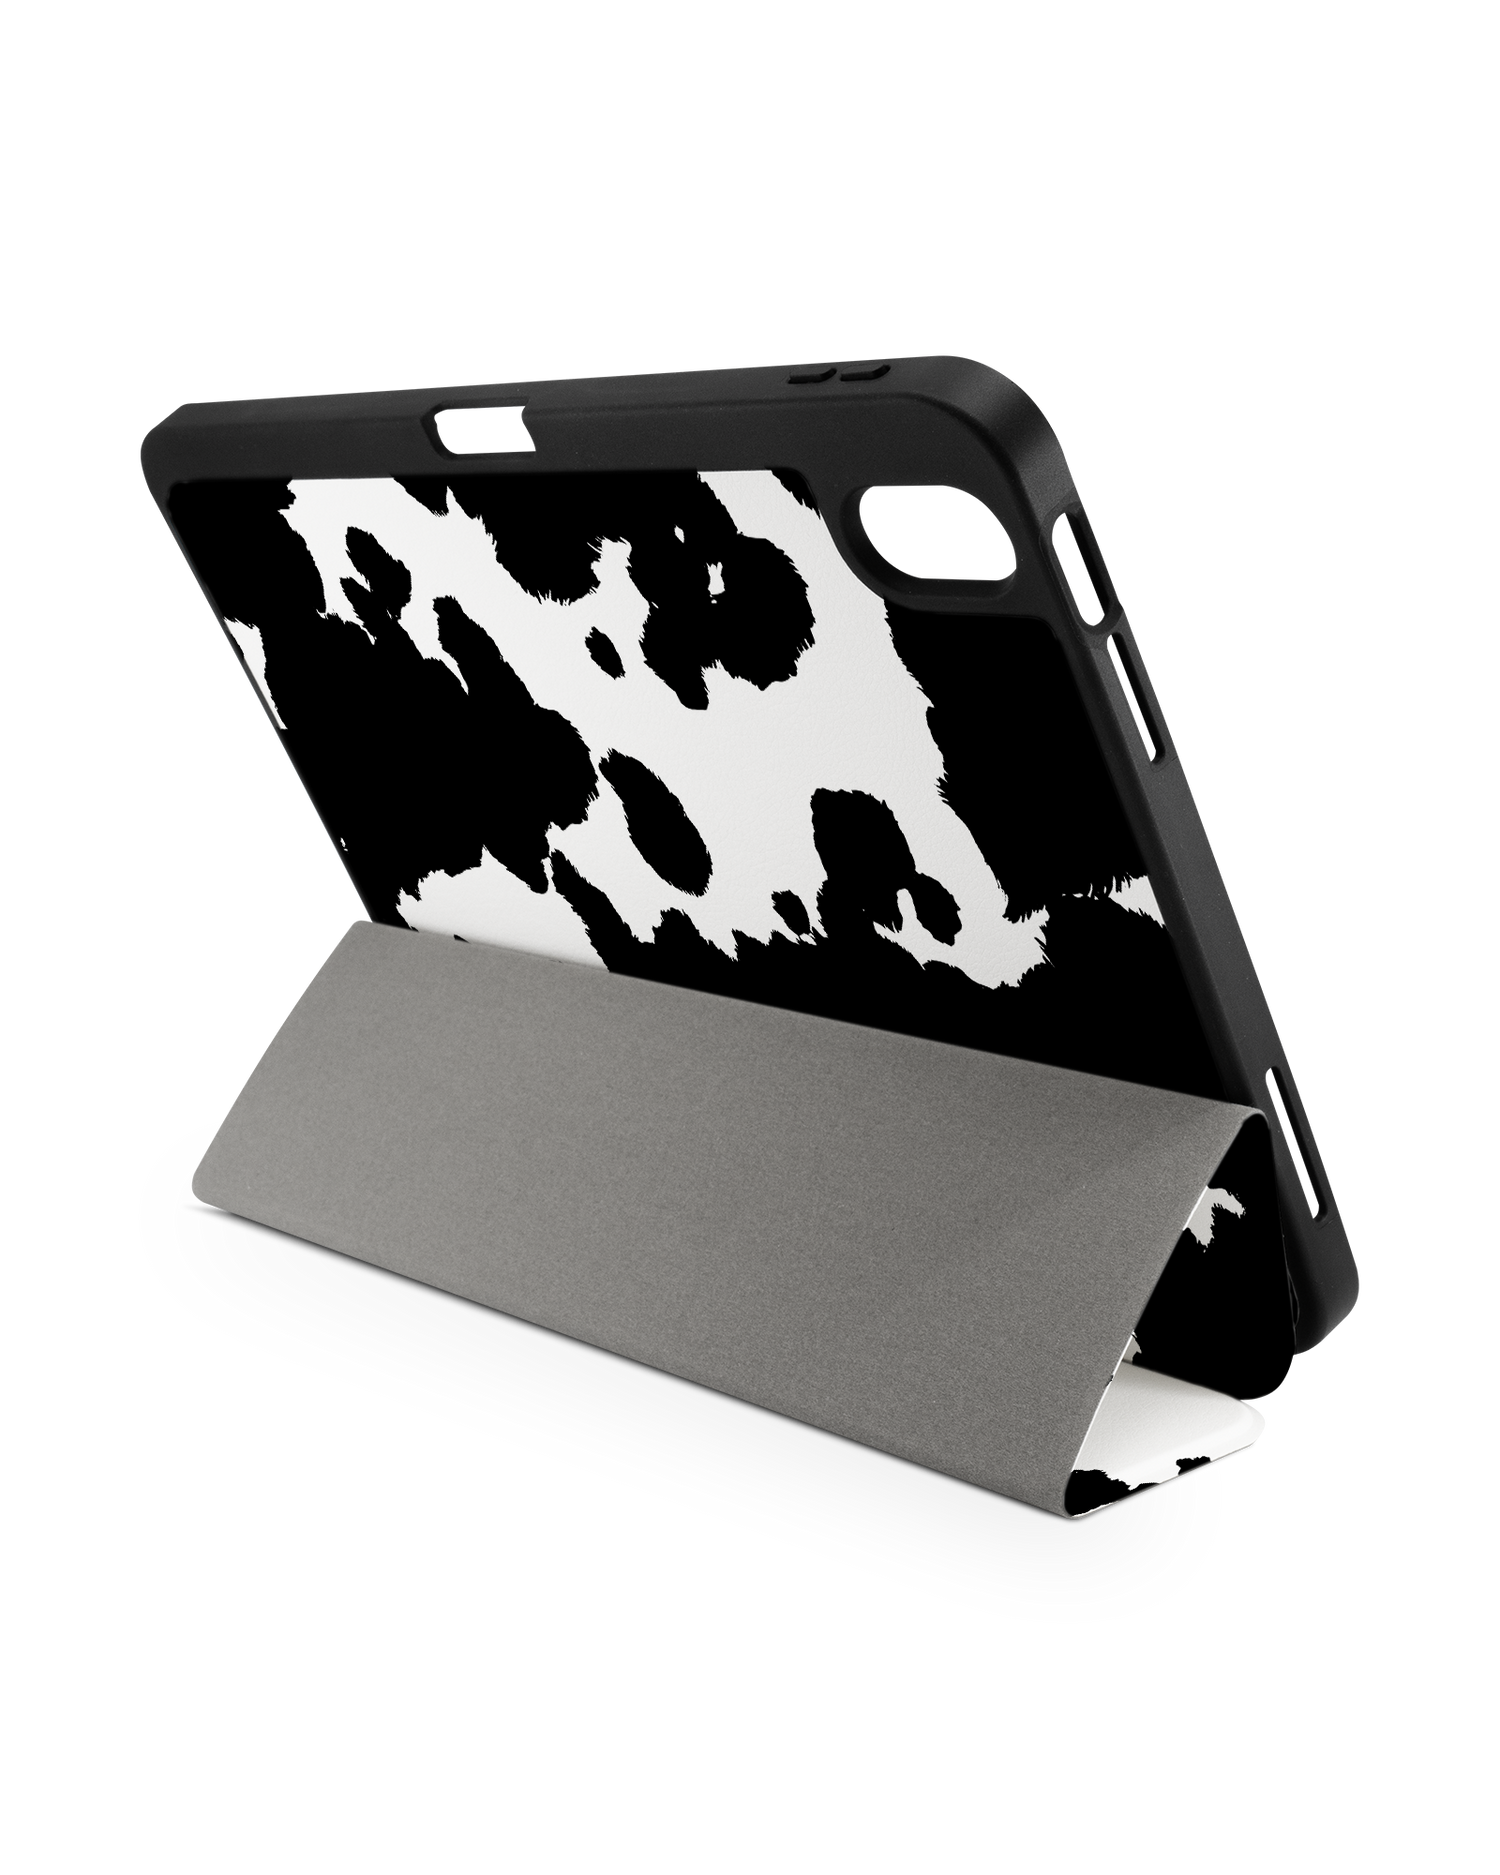 Cow Print iPad Case with Pencil Holder for Apple iPad (10th Generation): Set up in landscape format (back view)